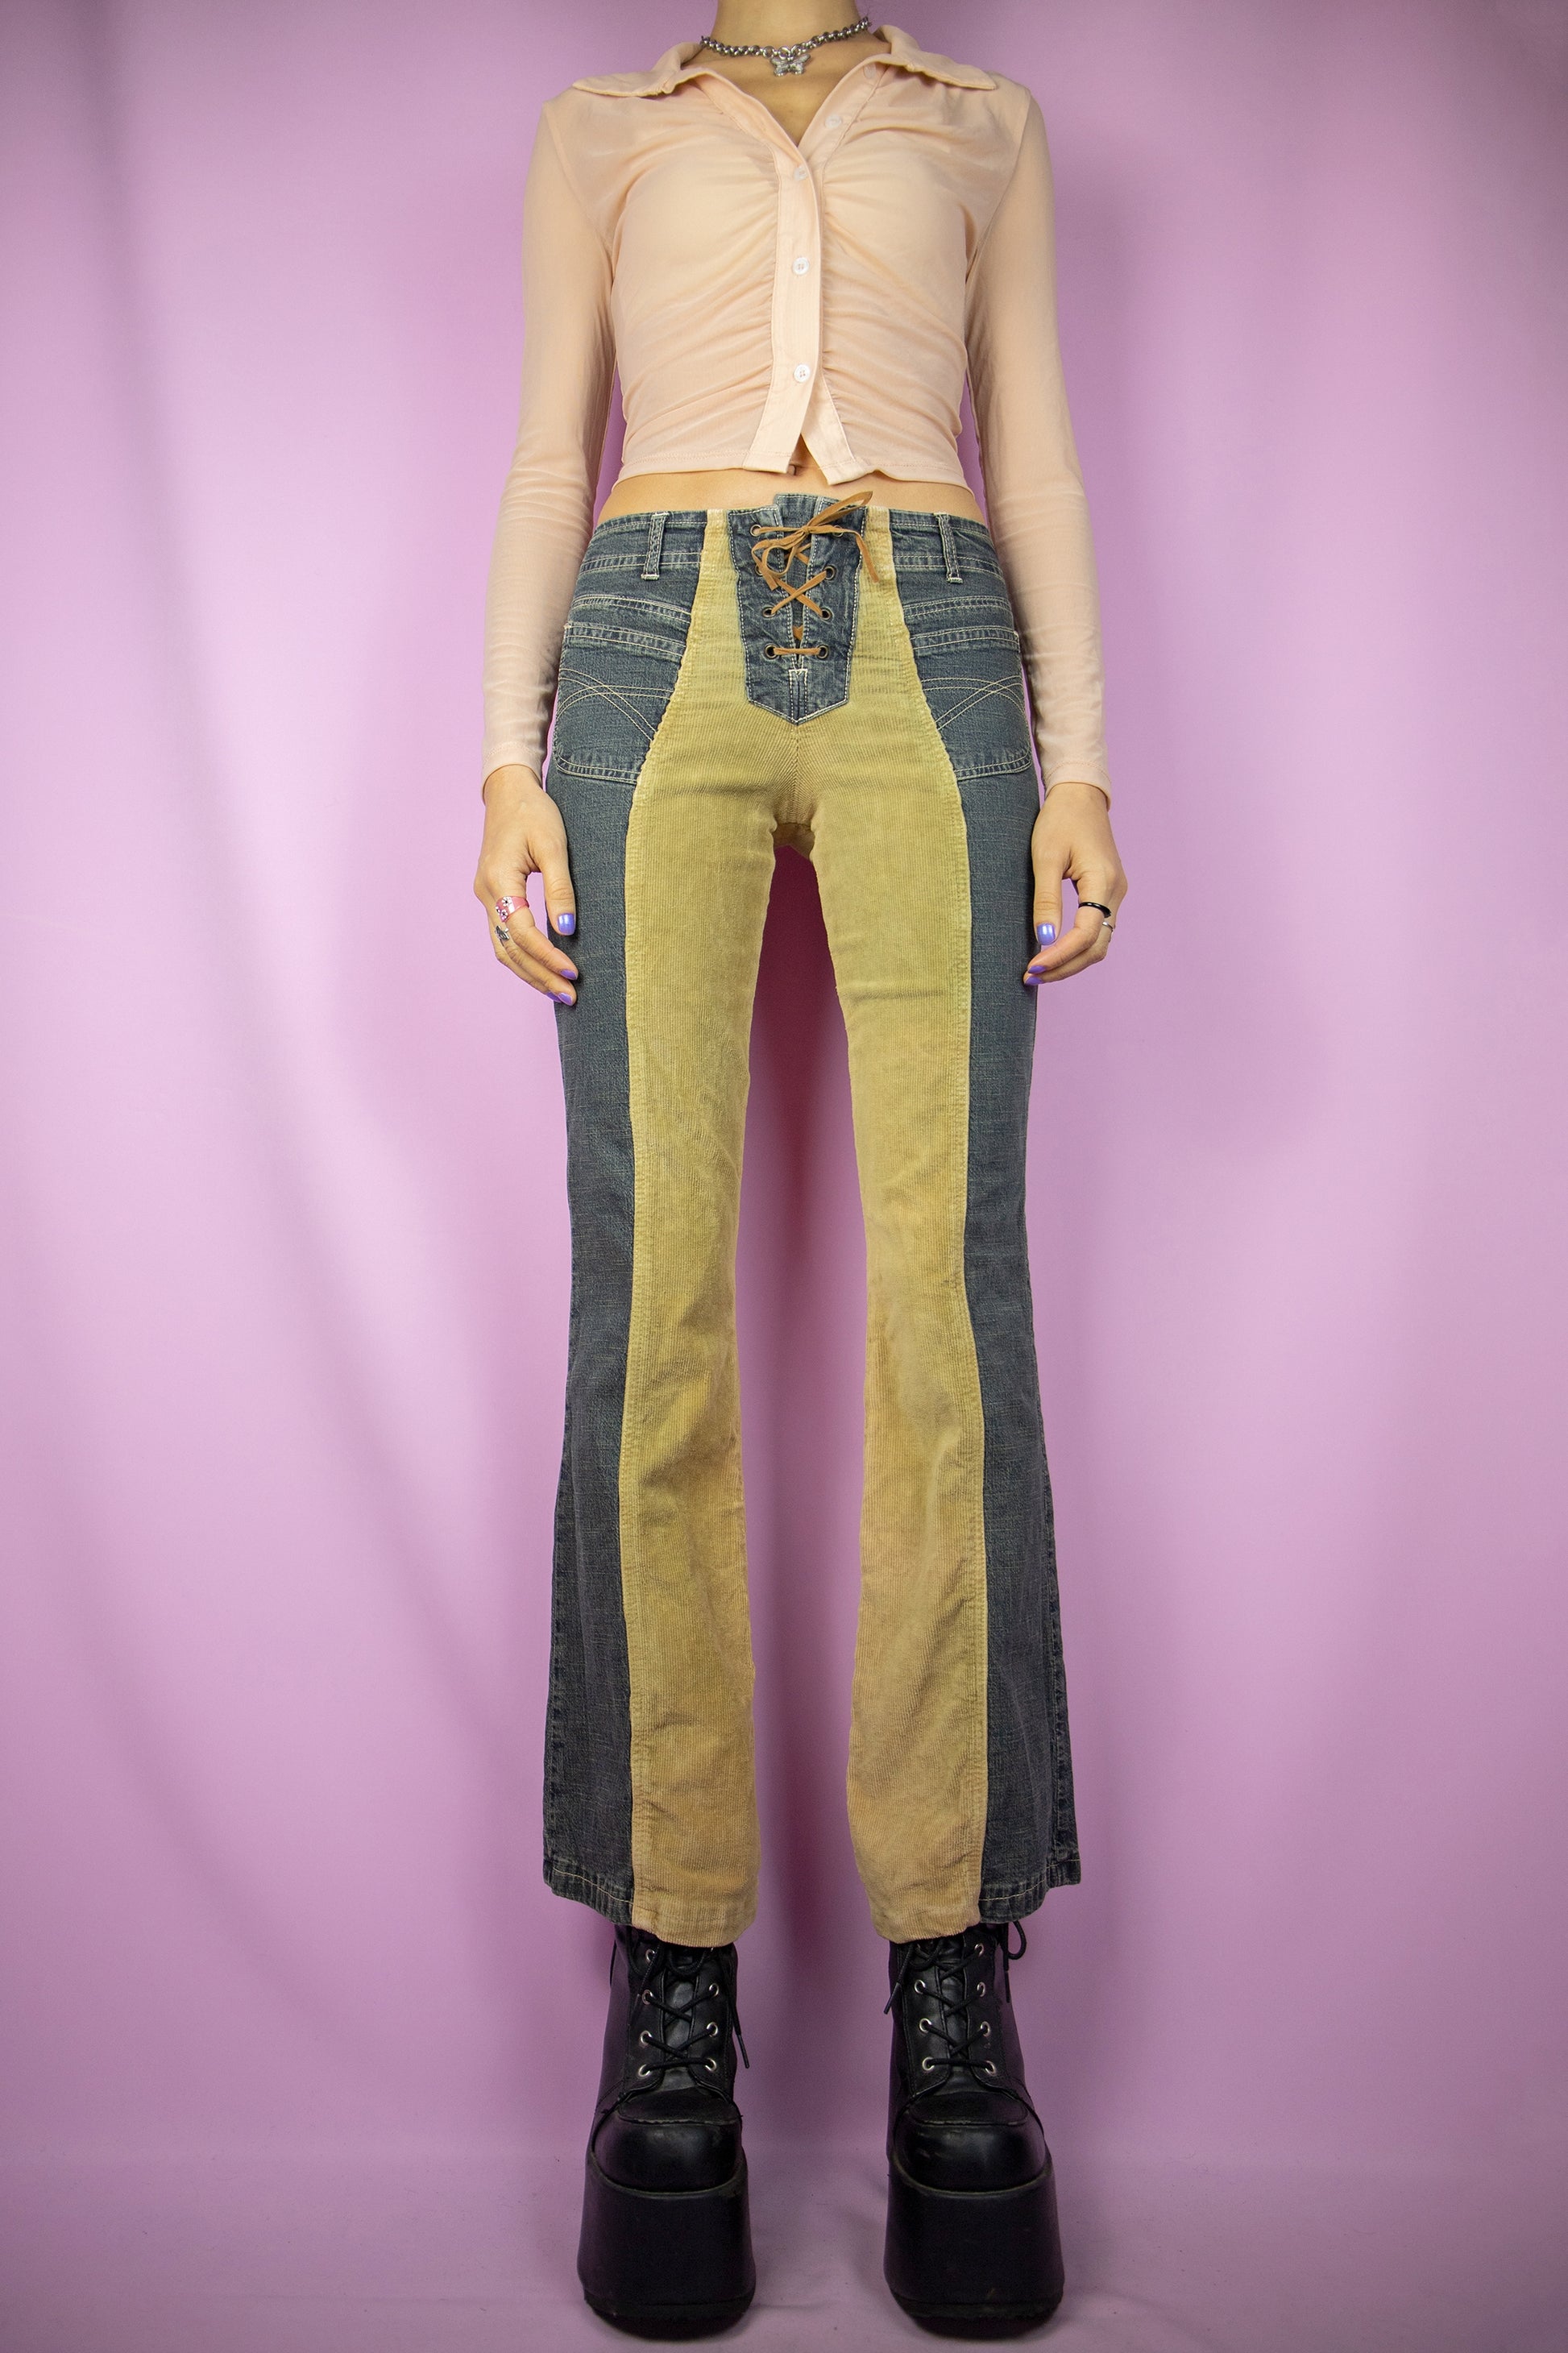 The Y2K Lace Up Flare Jeans are vintage 2000s country western inspired mid-rise half-denim and half-beige corduroy stretchy flared pants with pockets and a tie-front detail.